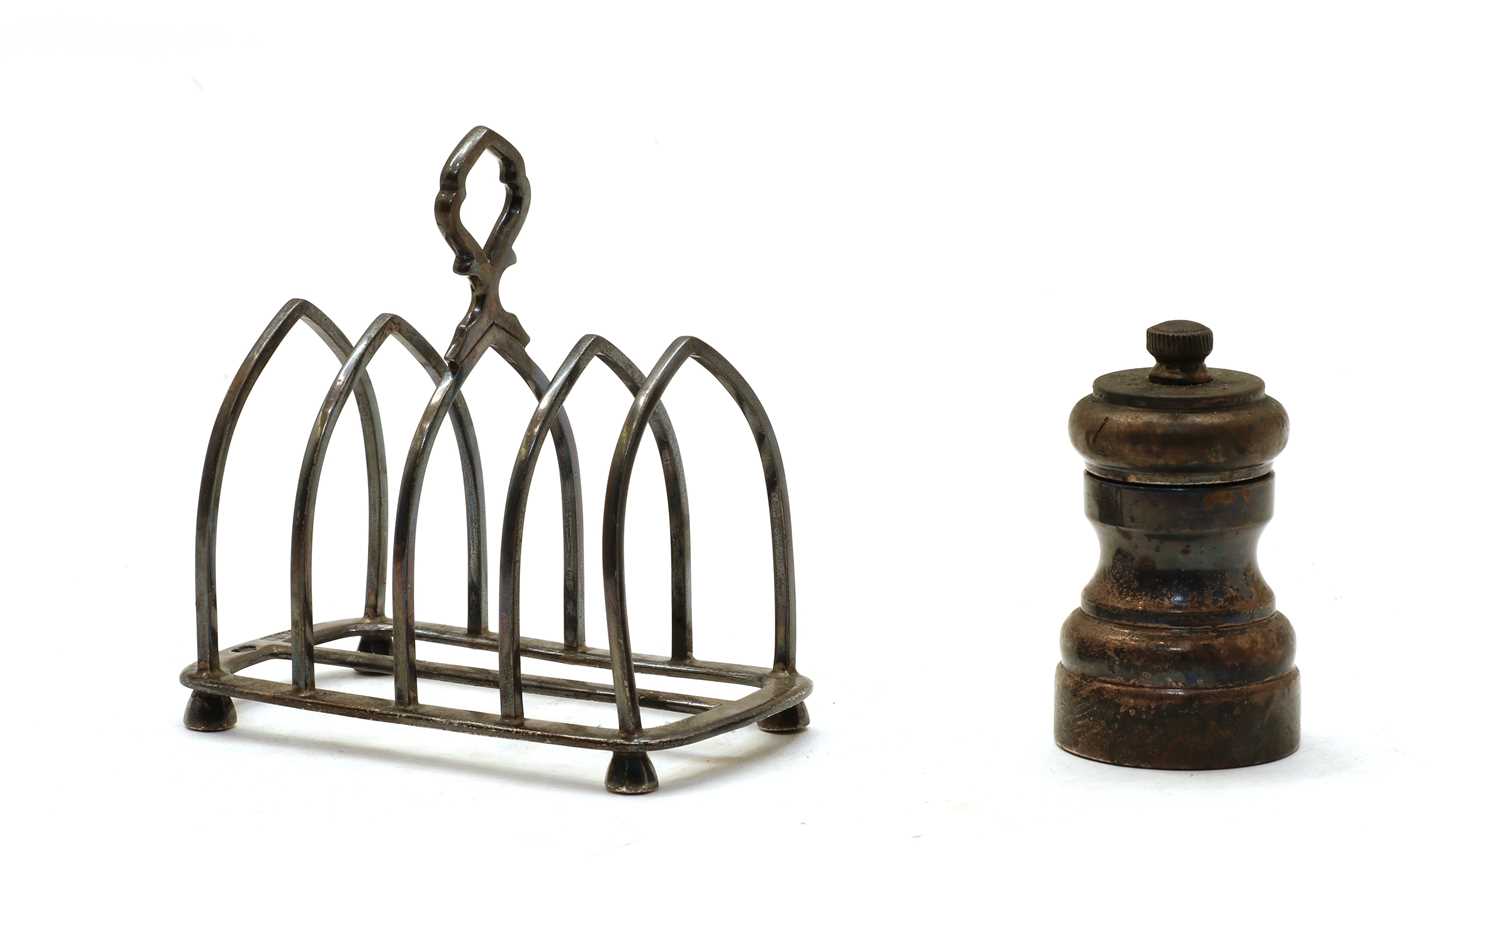 Lot 47 - A silver five division toast rack by Goldsmiths & Silvermiths Company, London 1903